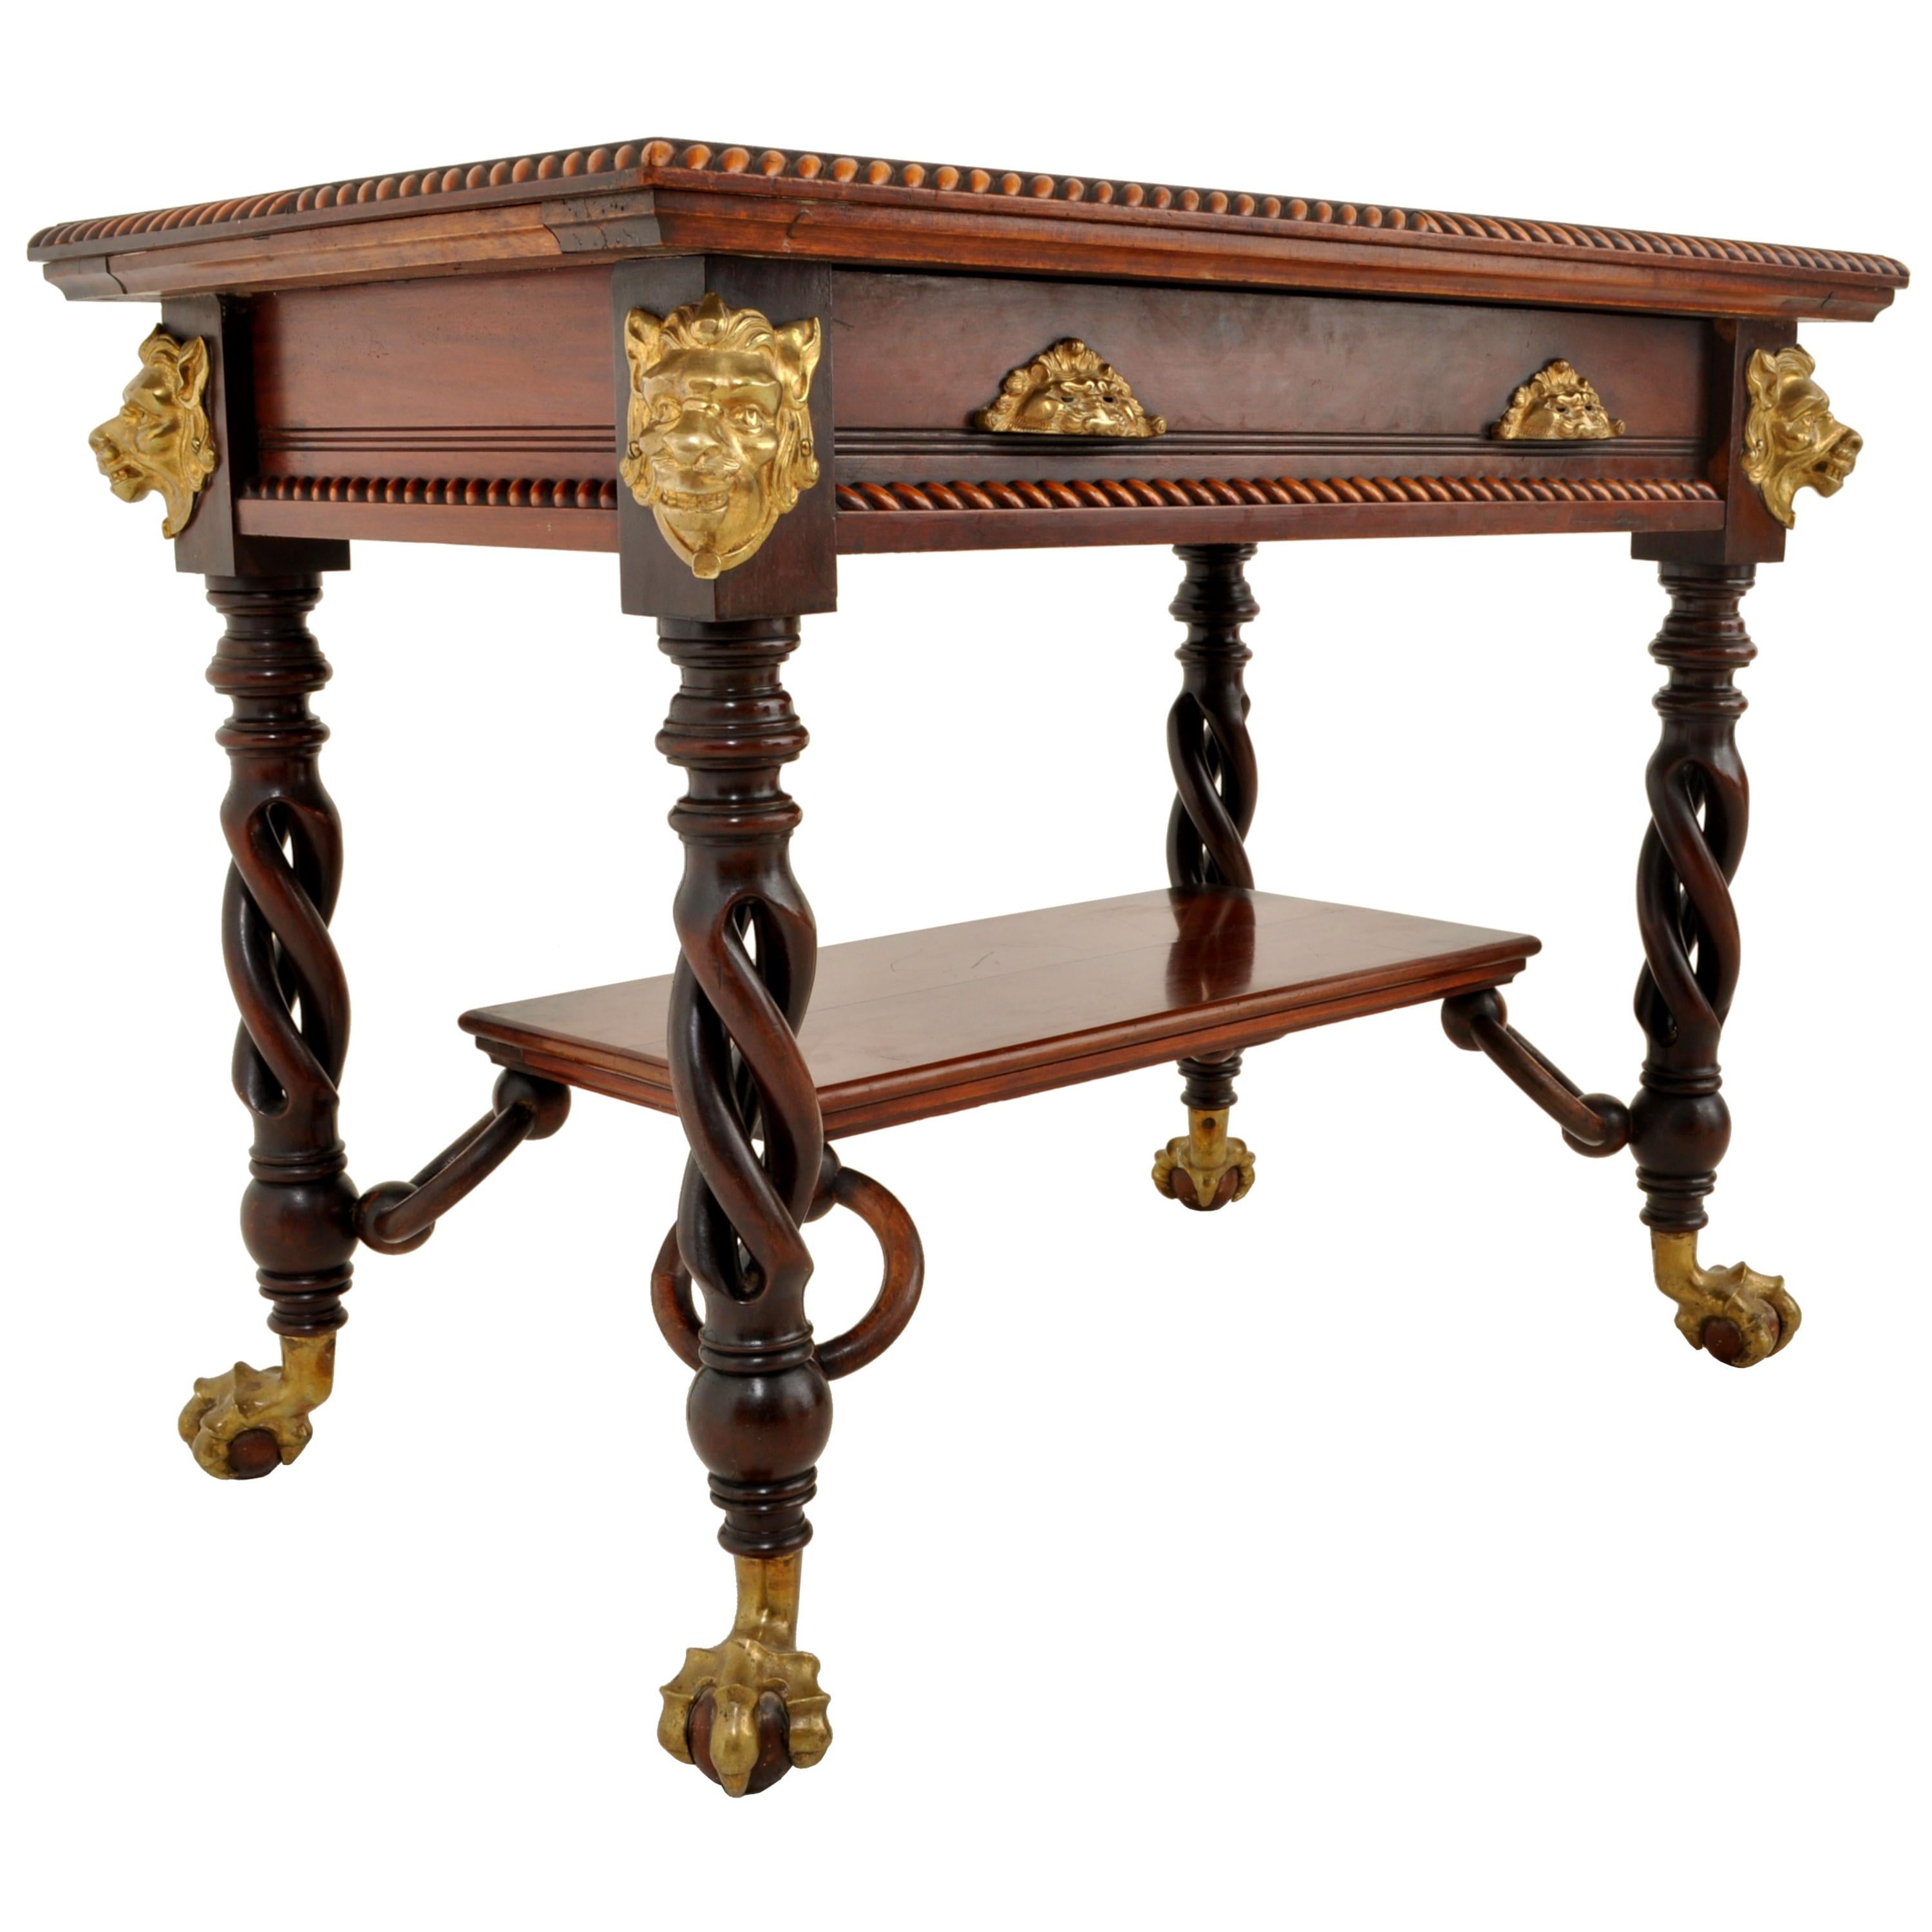 An exceptional antique American walnut library/writing table, by Merklen Bros of NYC, circa 1885. The table having a gadrooned top, with a single drawer to the front fitted with the original brass pulls cast as grotesque masks, the table having a